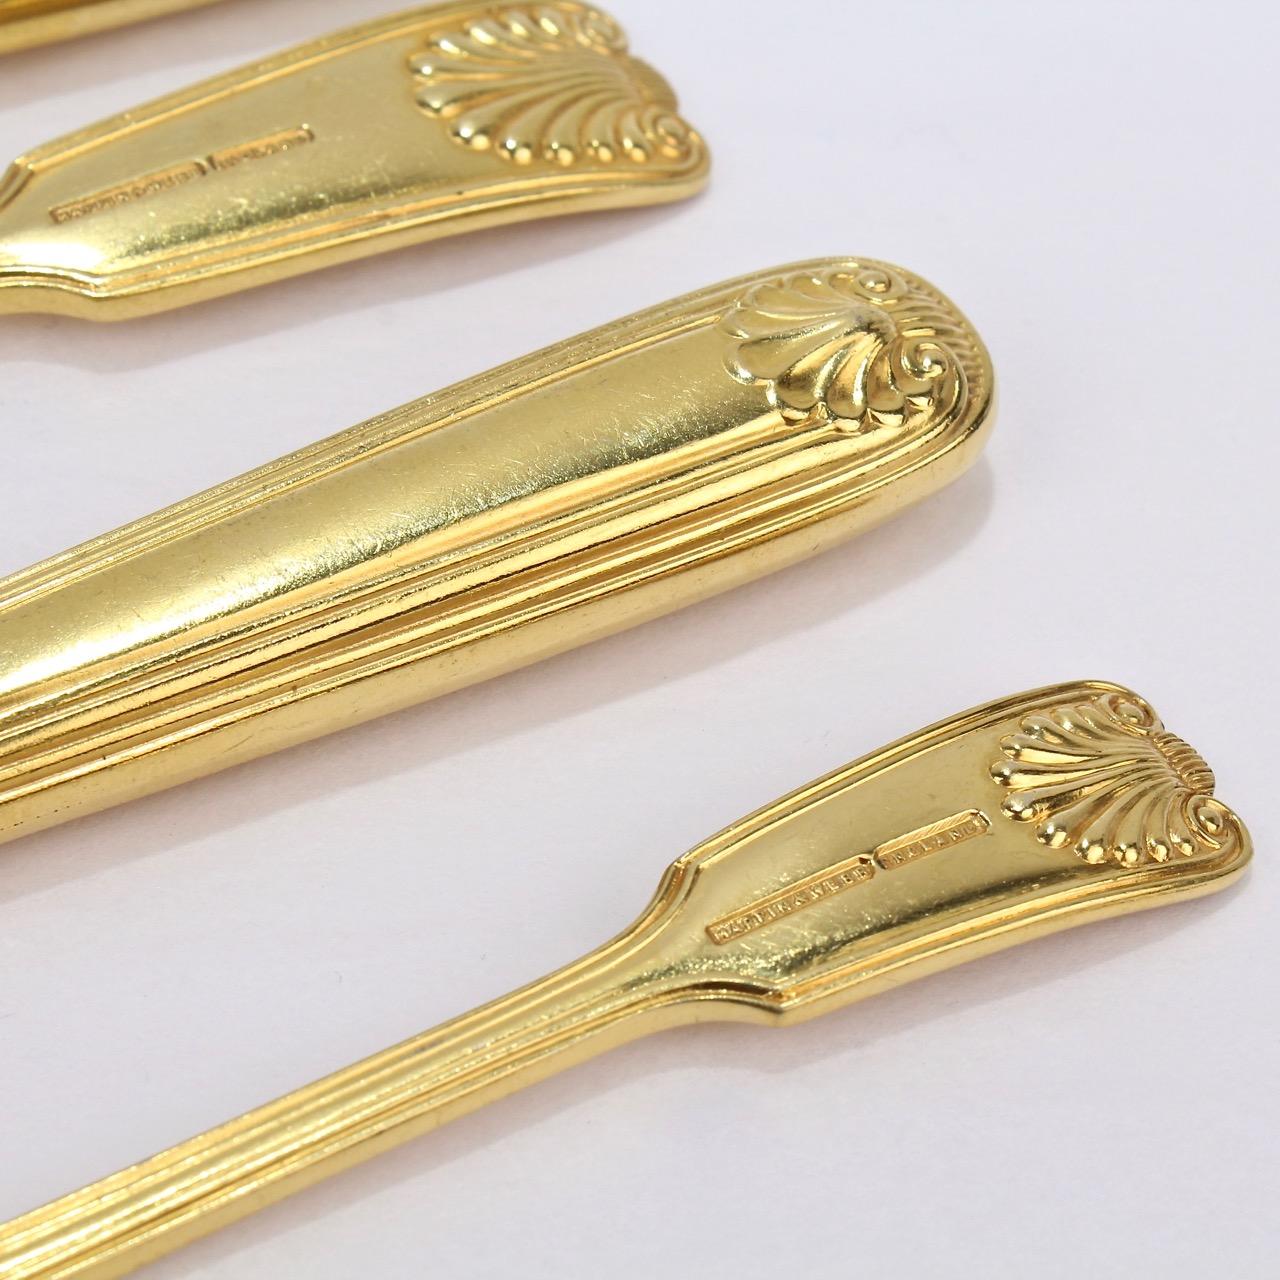 Antique Crested English  Mappin & Webb Gold-Plated Luncheon Flatware Set  2